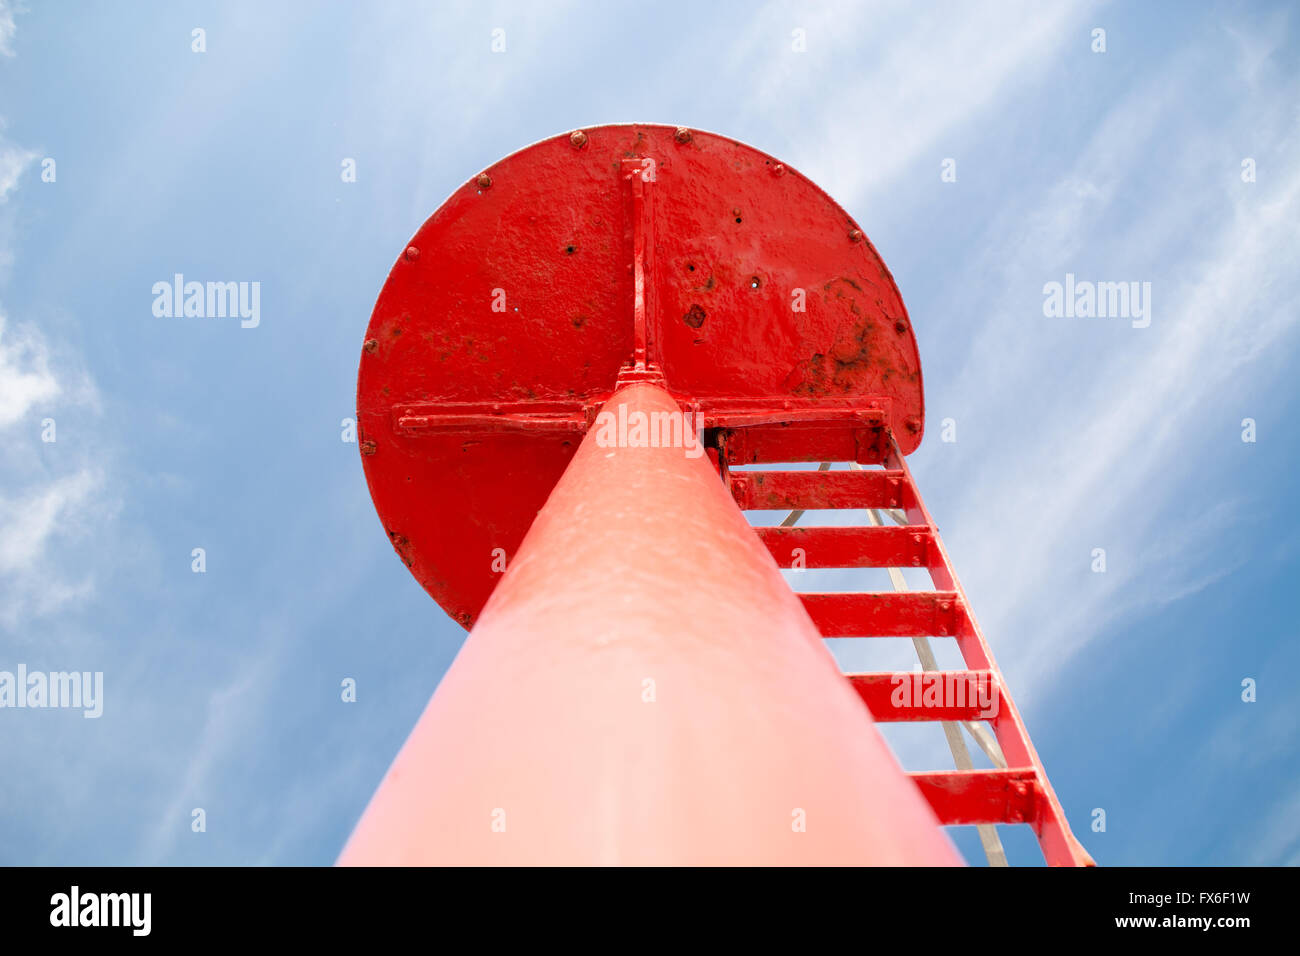 View from underneath the red lighthouse on the pier of Looe, Cornwall Stock Photo